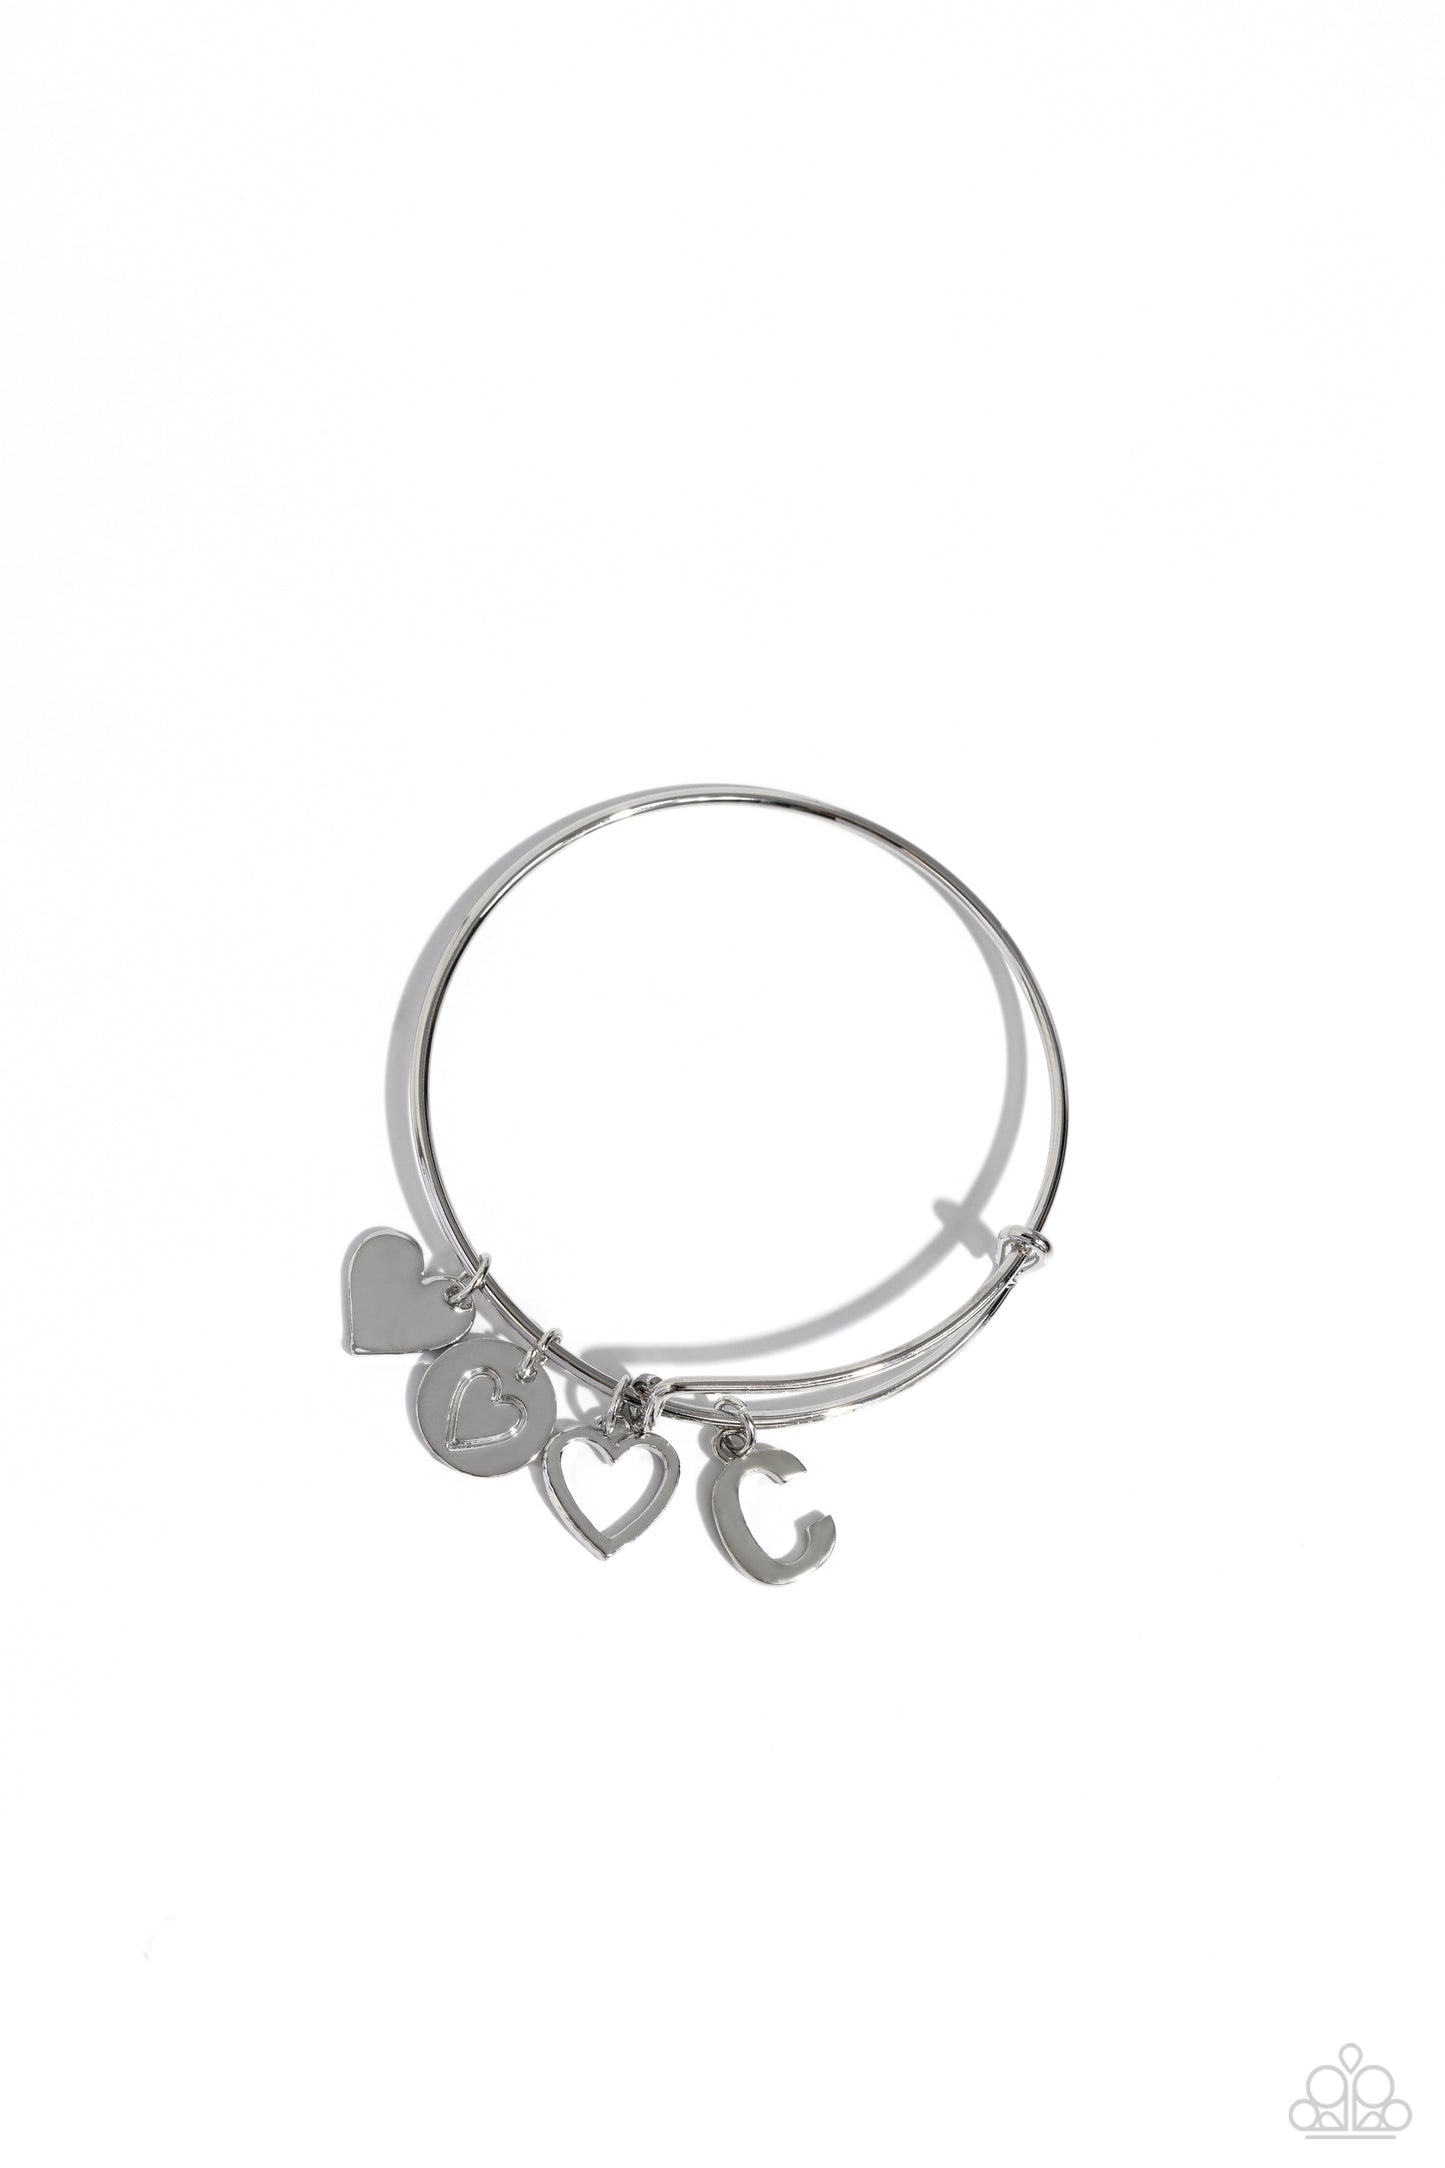 Making It INITIAL Silver "C" Bracelet - Paparazzi Accessories  Featuring shiny silver, airy, and stamped finishes, a mismatched collection of dainty heart charms, and the letter "C" glides along a silver bar fitting at the center of the wrist for a romantic, sentimental flair.  Sold as one individual bracelet.  SKU: P9BA-SVXX-187XX